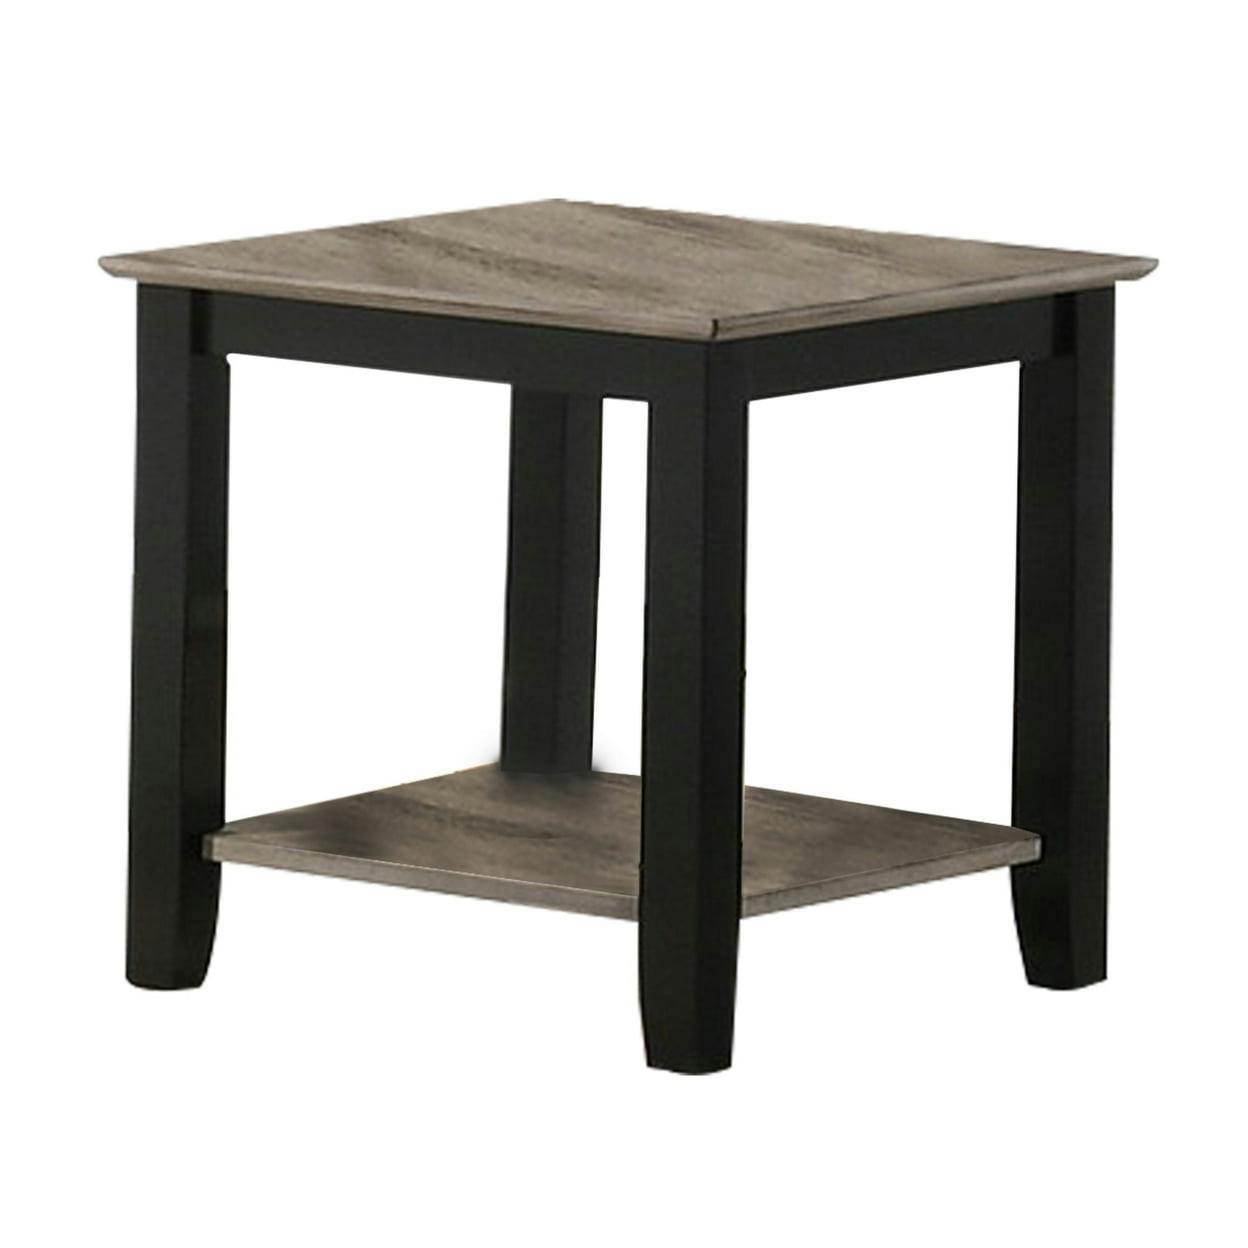 Chamfered Leg 22" Square Wooden End Table in Black and Gray